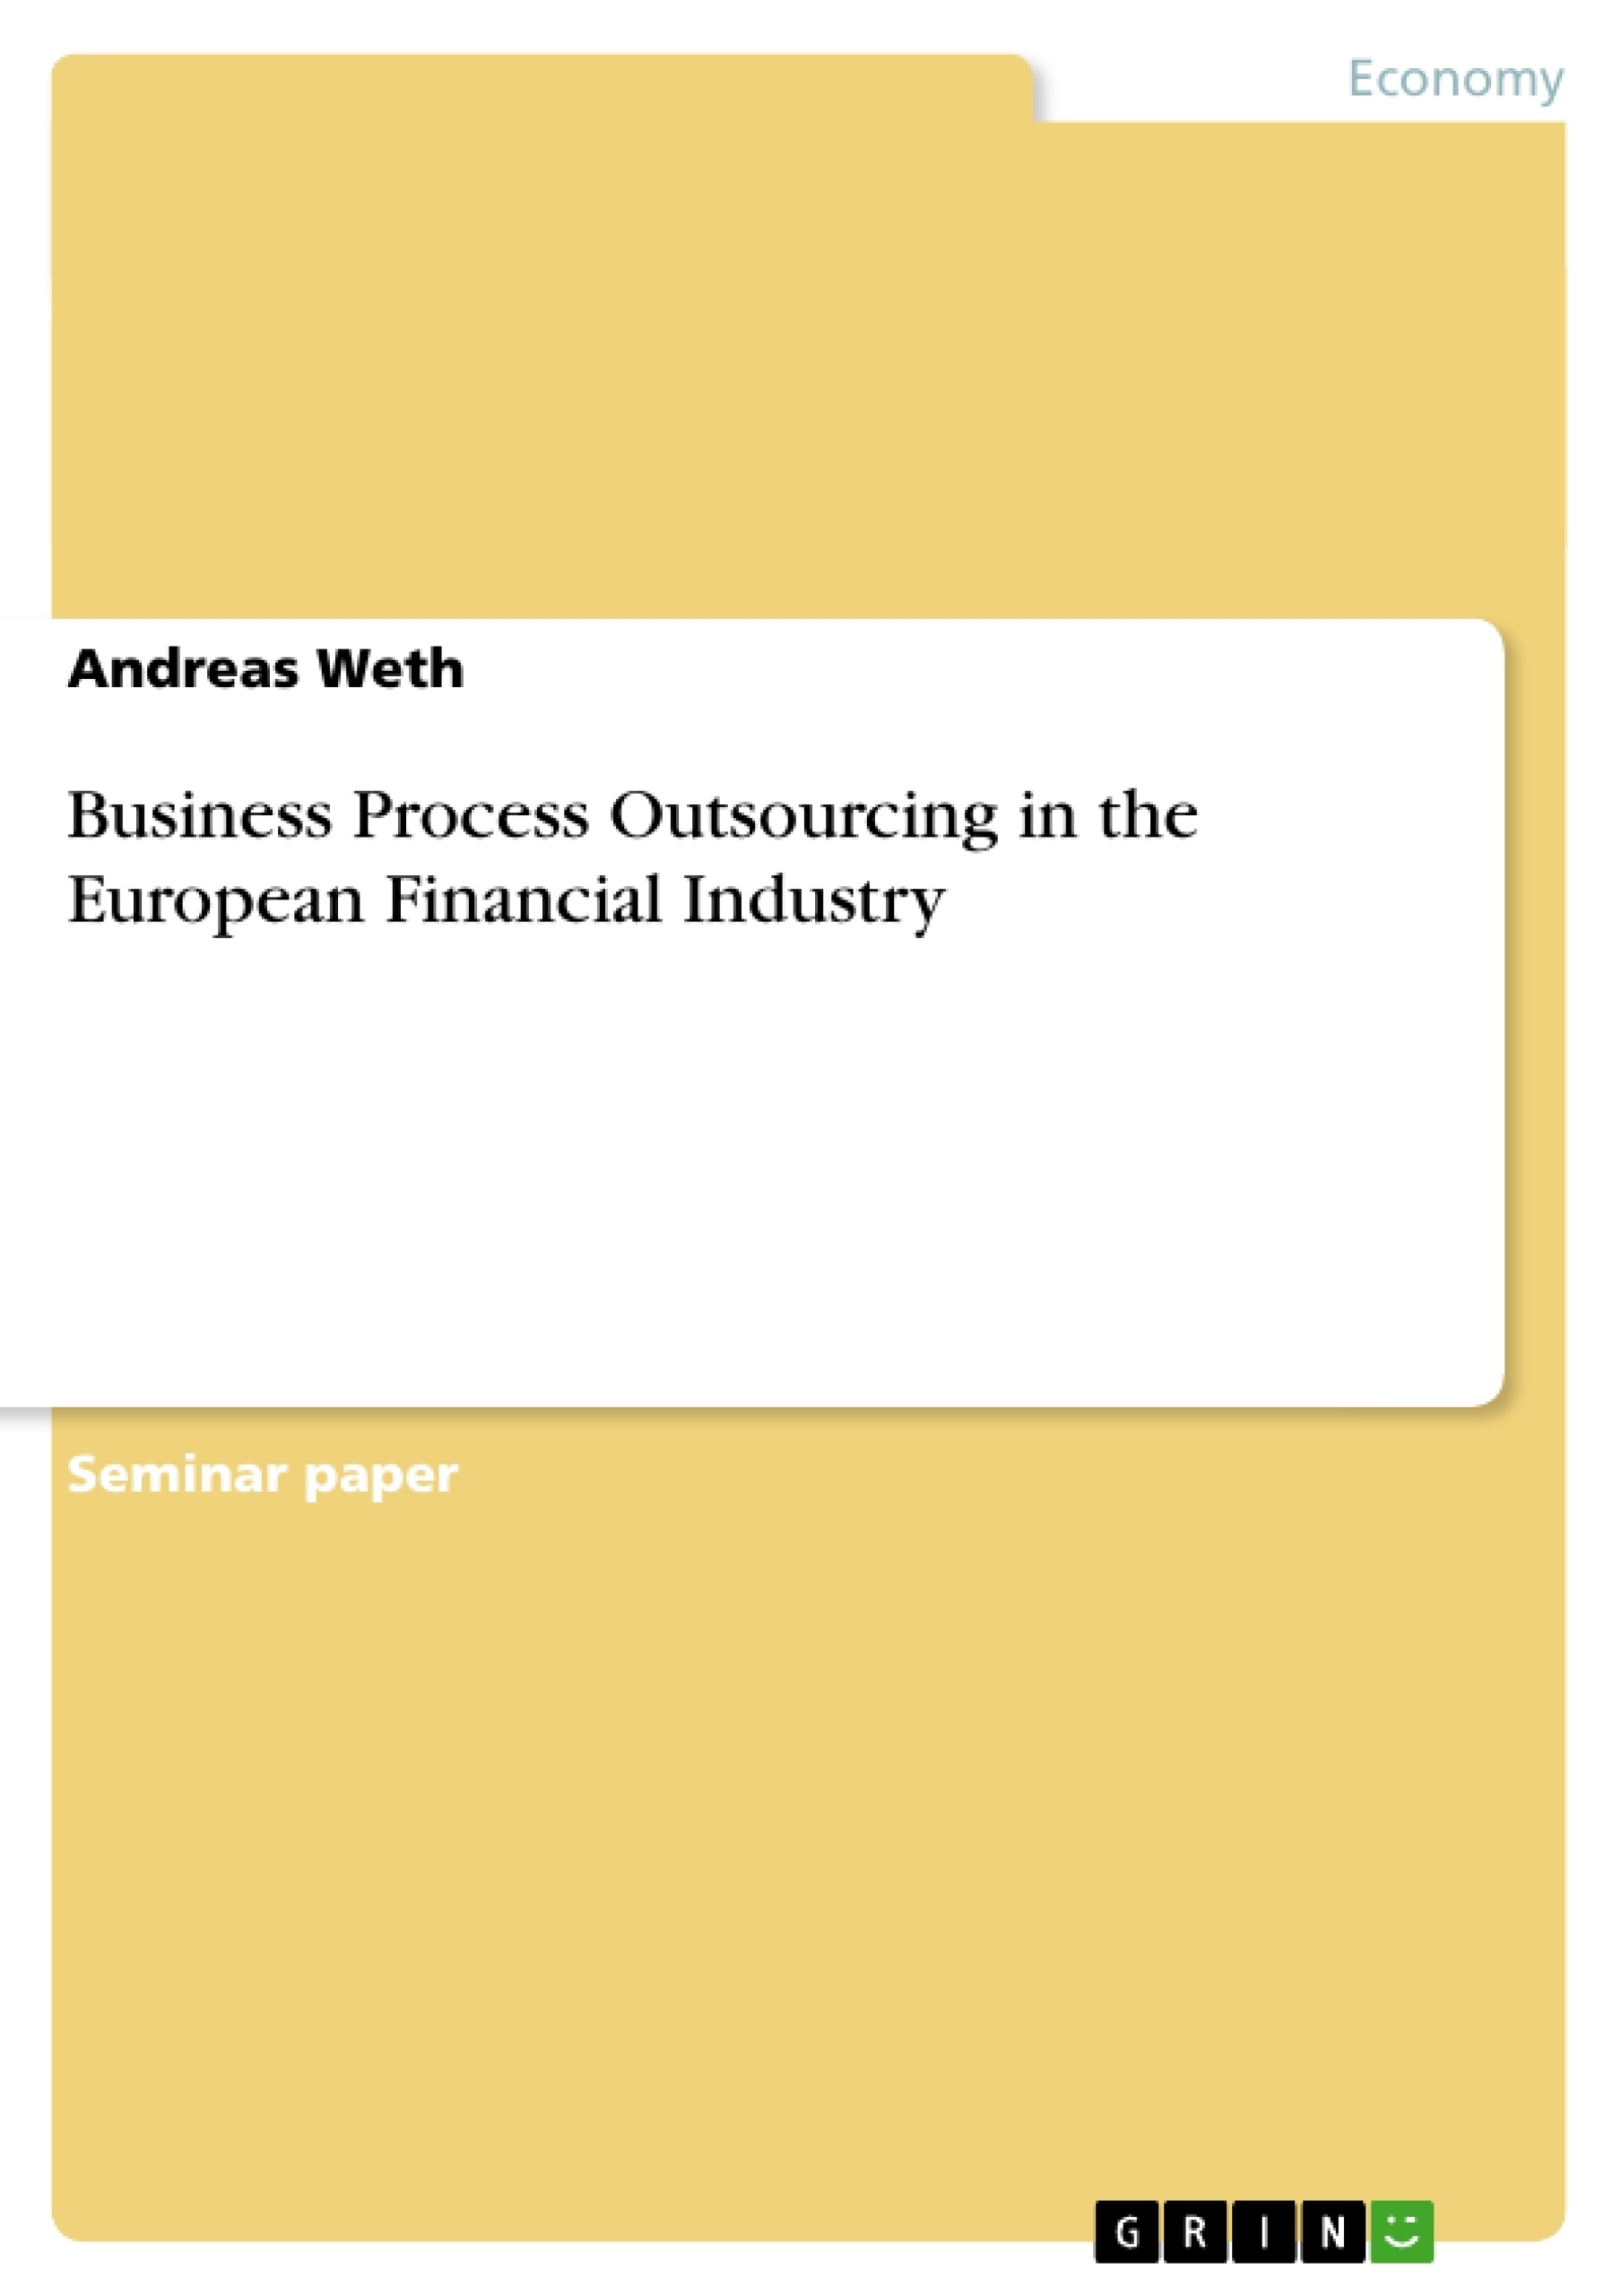 Título: Business Process Outsourcing in the European Financial Industry